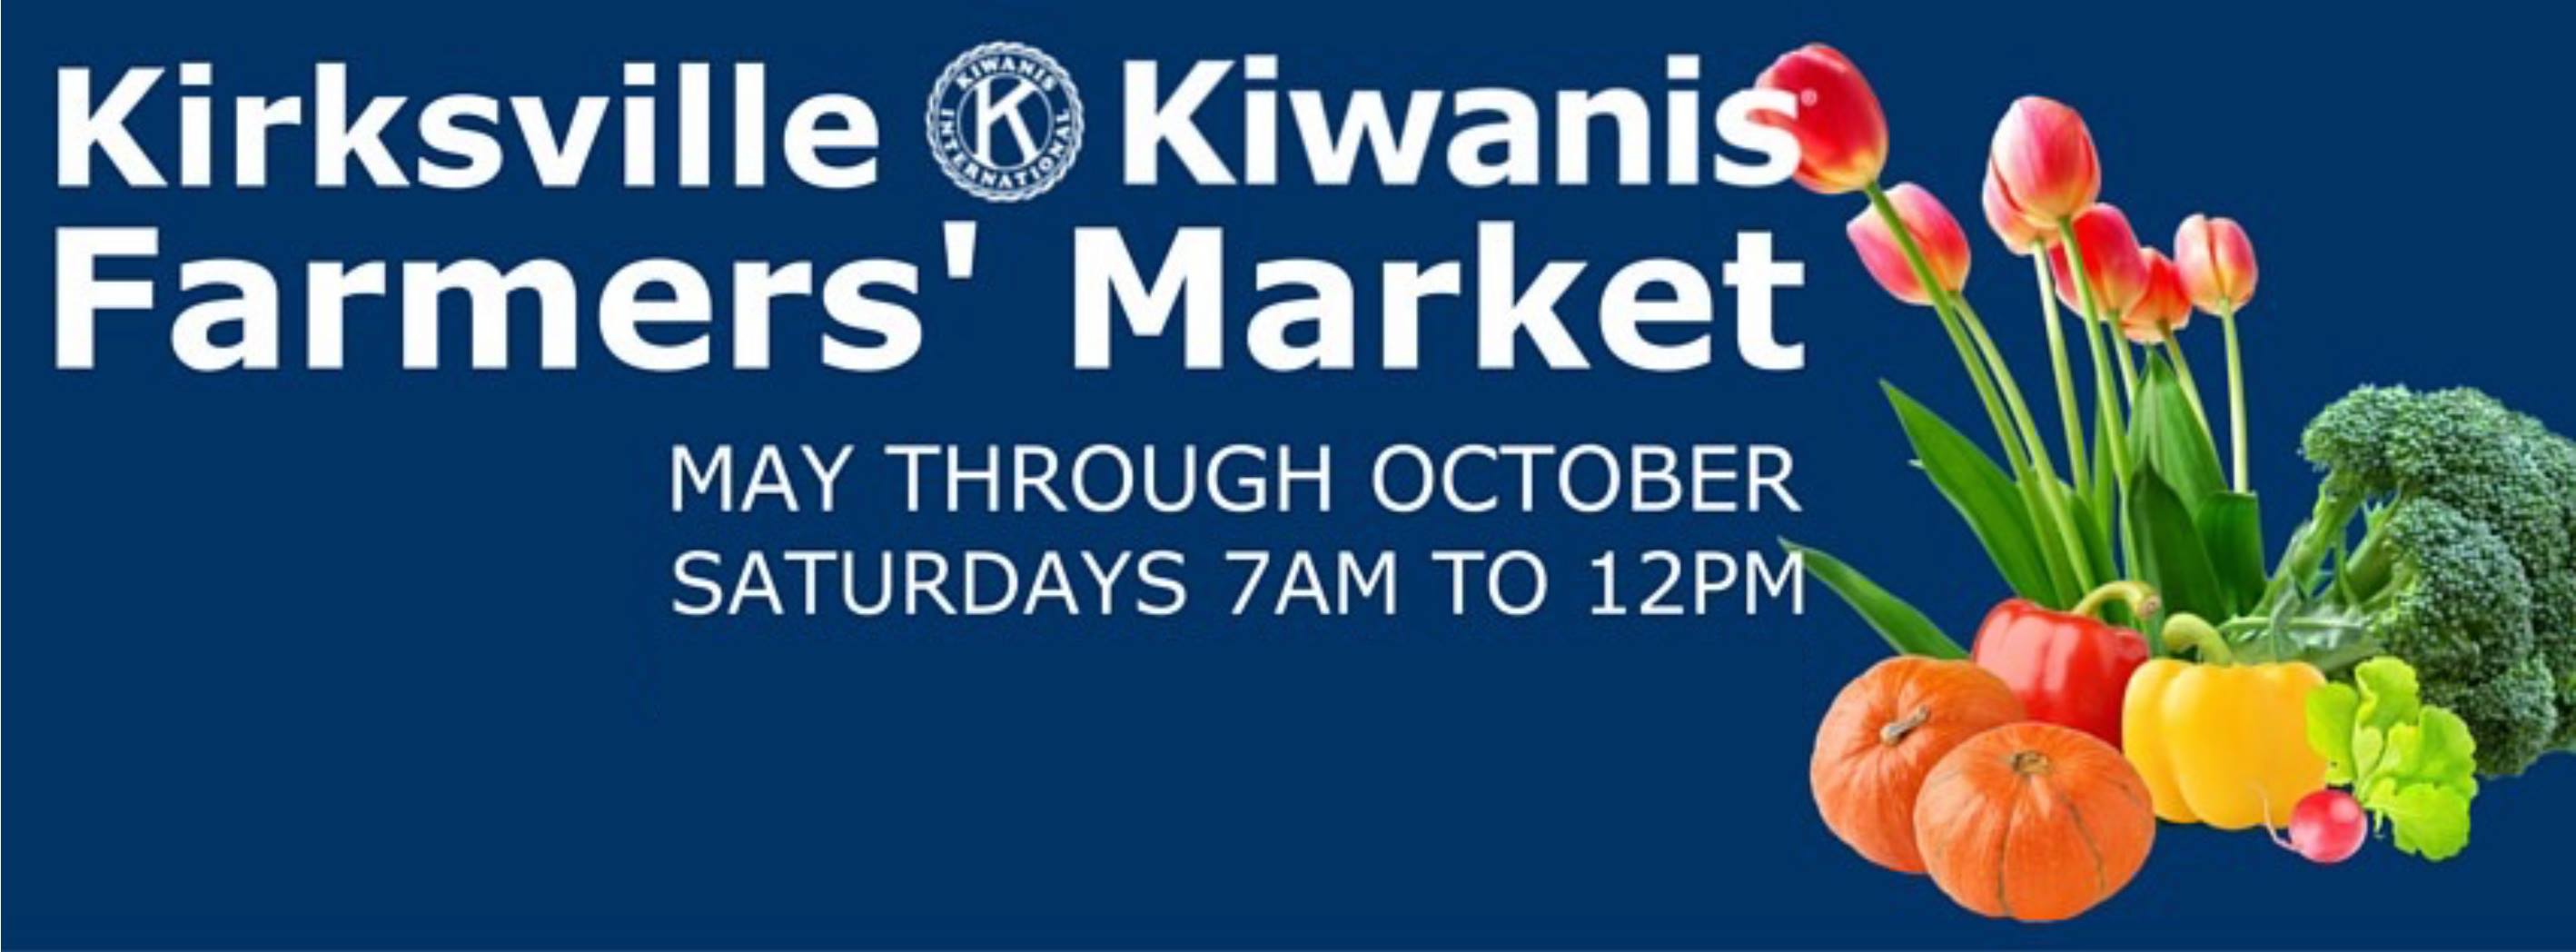 Check more about Kirksville Kiwanis Farmers’ Market